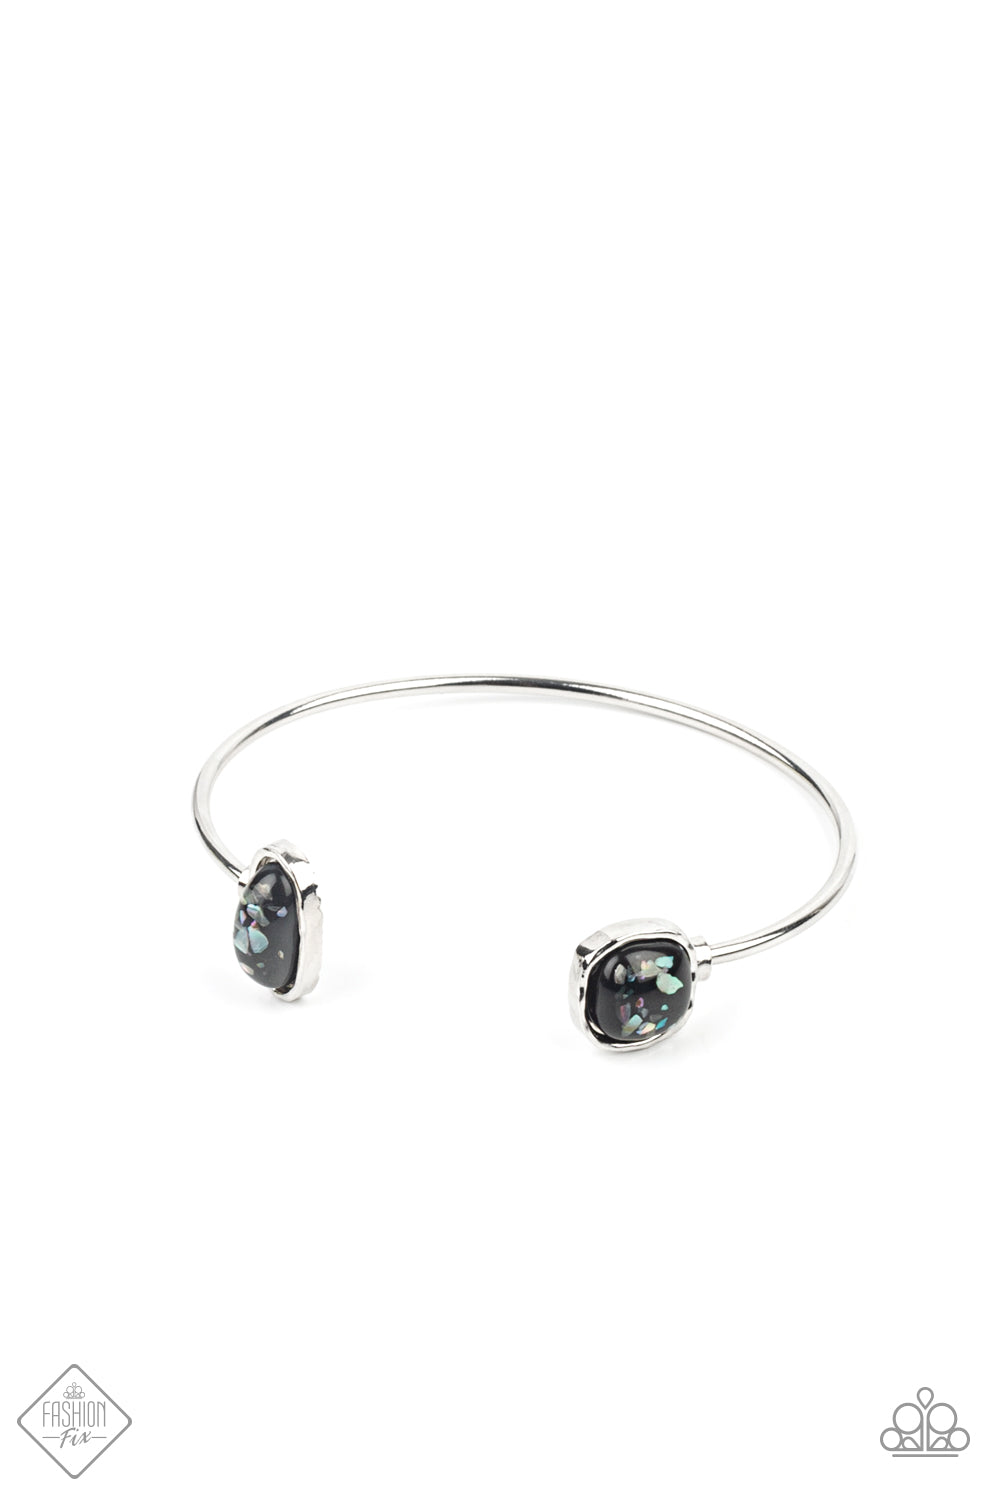 Dont BEAD Jealous Black Bracelet - Paparazzi Accessories.  Flecks of iridescent shell-like pieces are encased inside two mismatched glassy black beads at both ends of a dainty silver open-faced cuff. The shimmery beads are encased in imperfectly hammered silver frames, adding a whimsy finish to the bubbly display.  ﻿All Paparazzi Accessories are lead free and nickel free!  Sold as one individual bracelet.